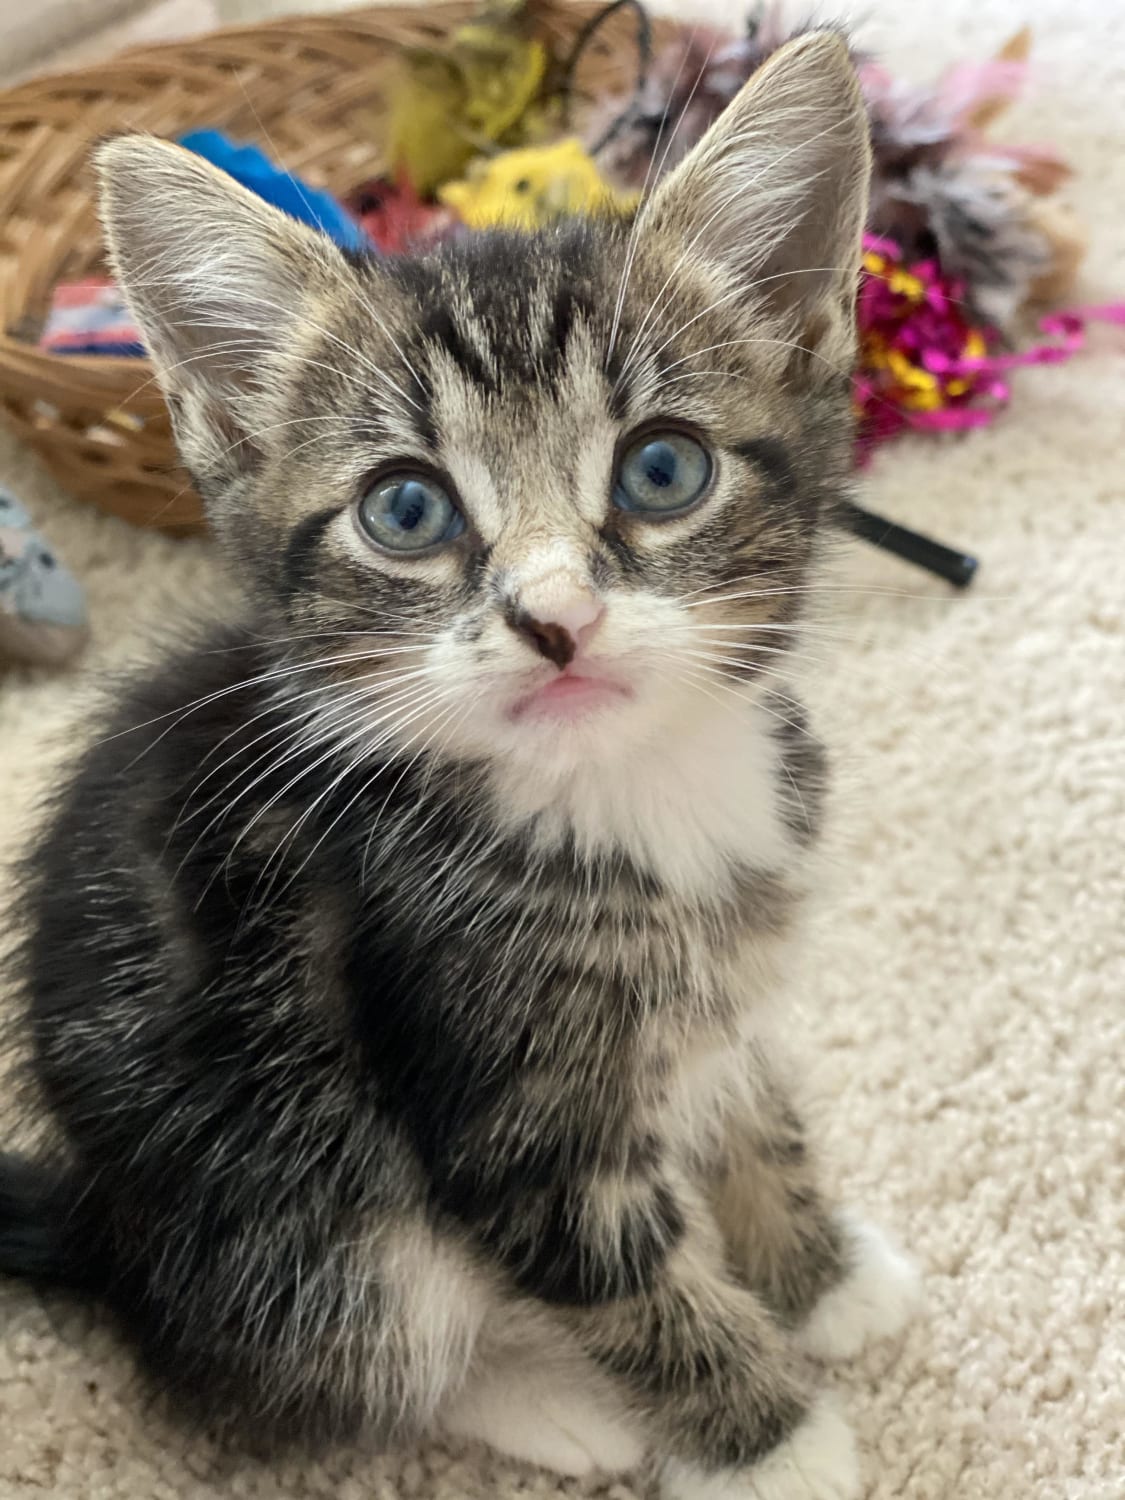 One of my new adorable foster kittens!